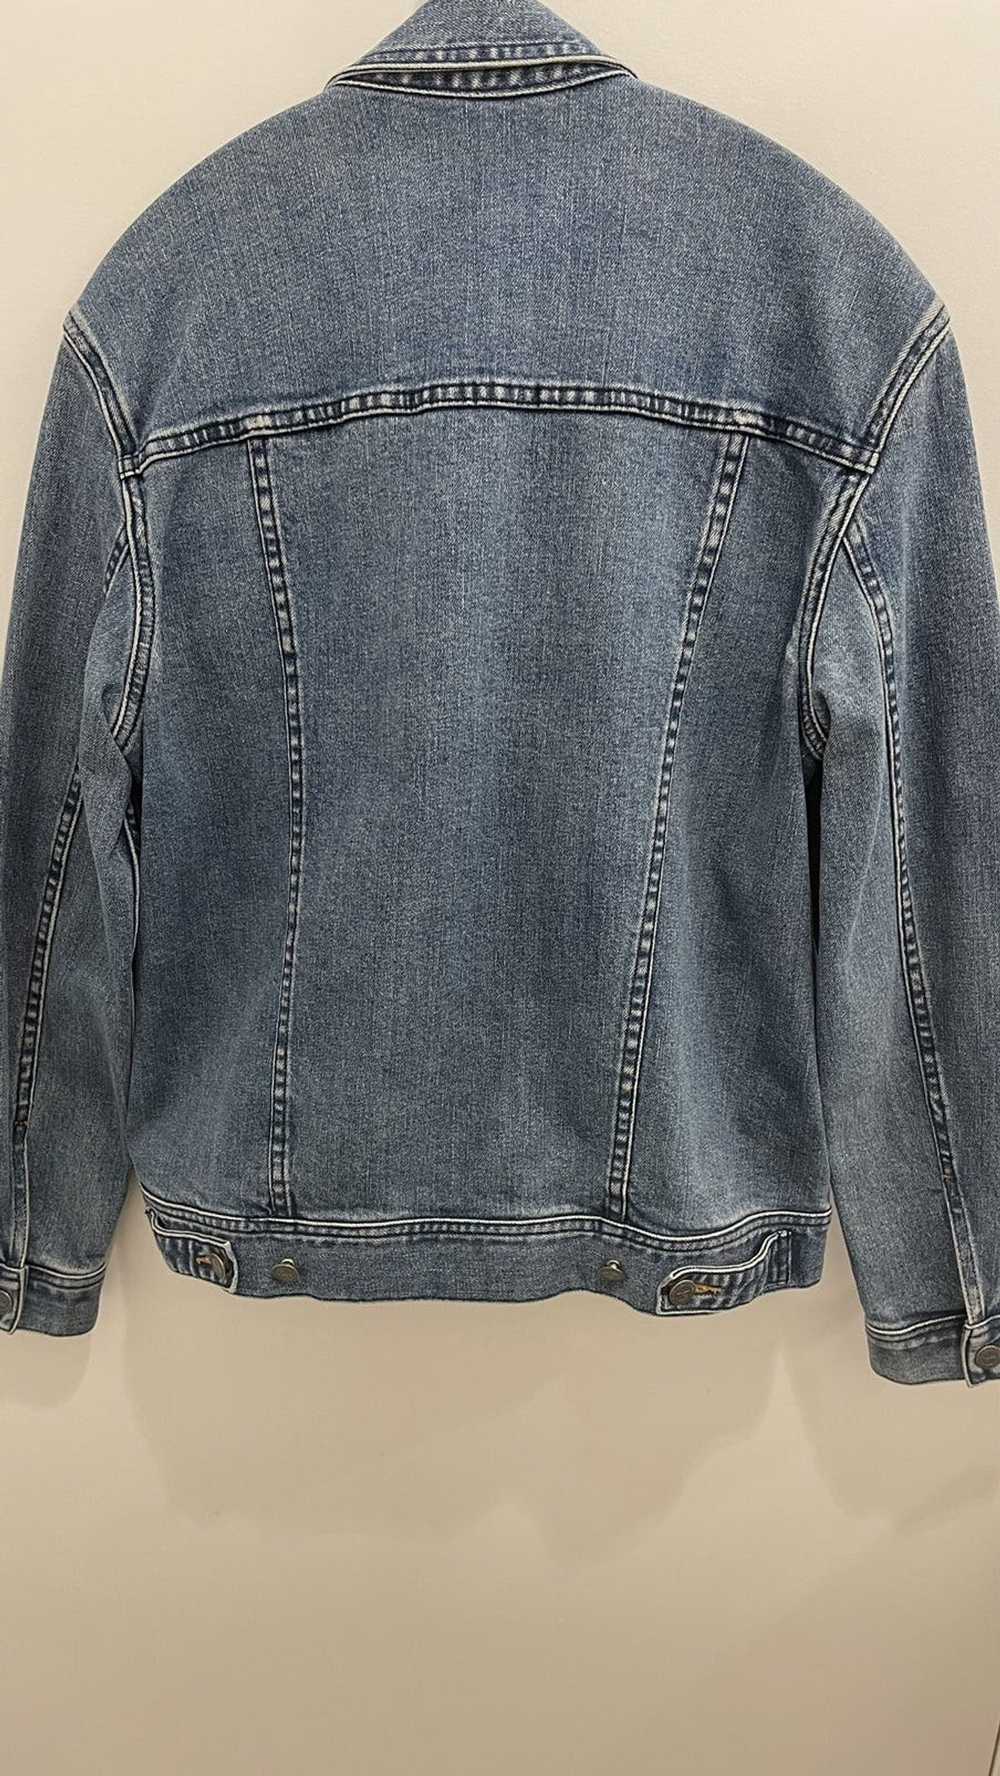 A.P.C. A.P.C. Fitted Denim Jacket - image 4